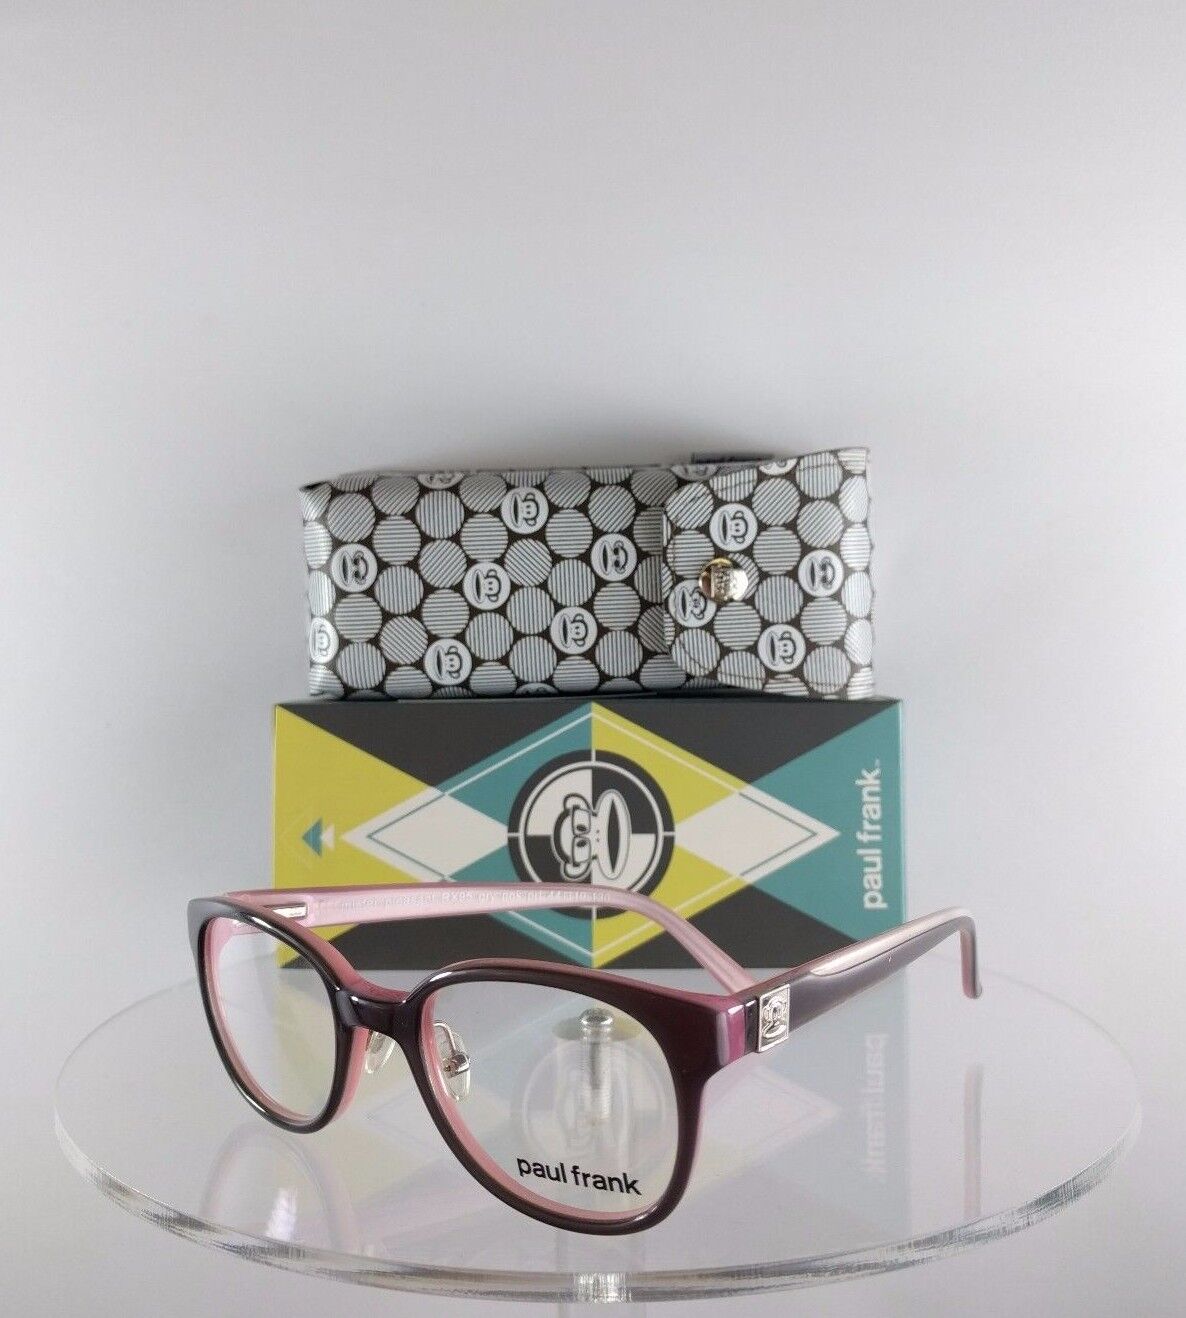 Brand New Authentic Paul Frank Eyeglasses Mister Pleasant RX95 Gray Pink Frame